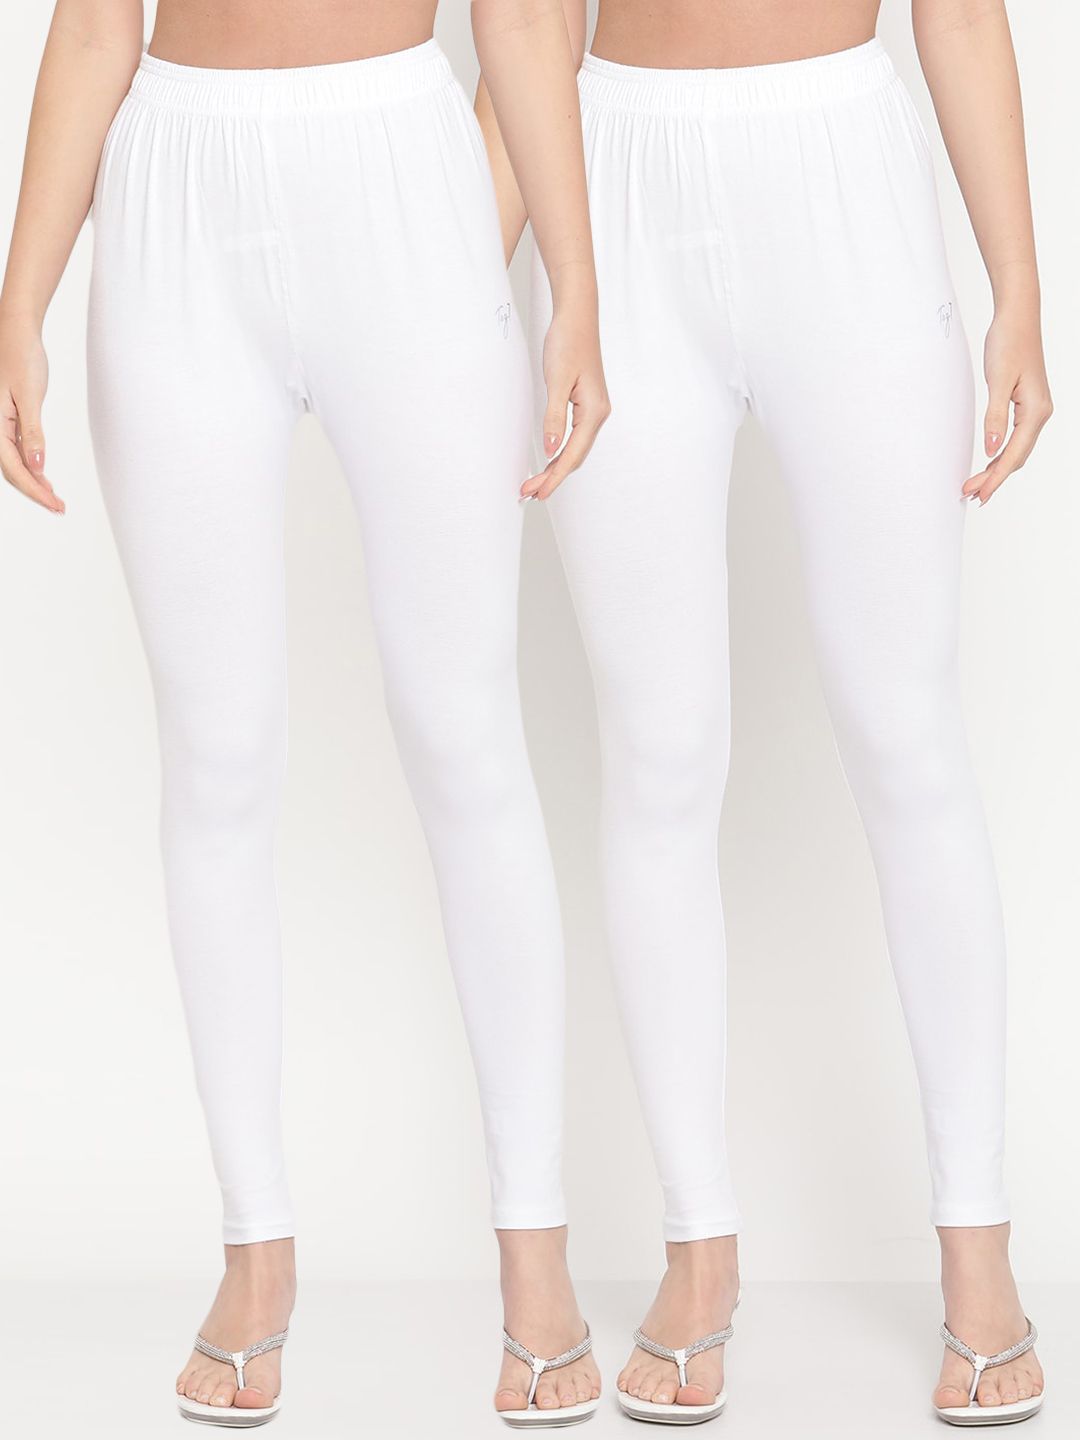 TAG 7 Women Pack Of 2 White Solid Ankle-Length Leggings Price in India